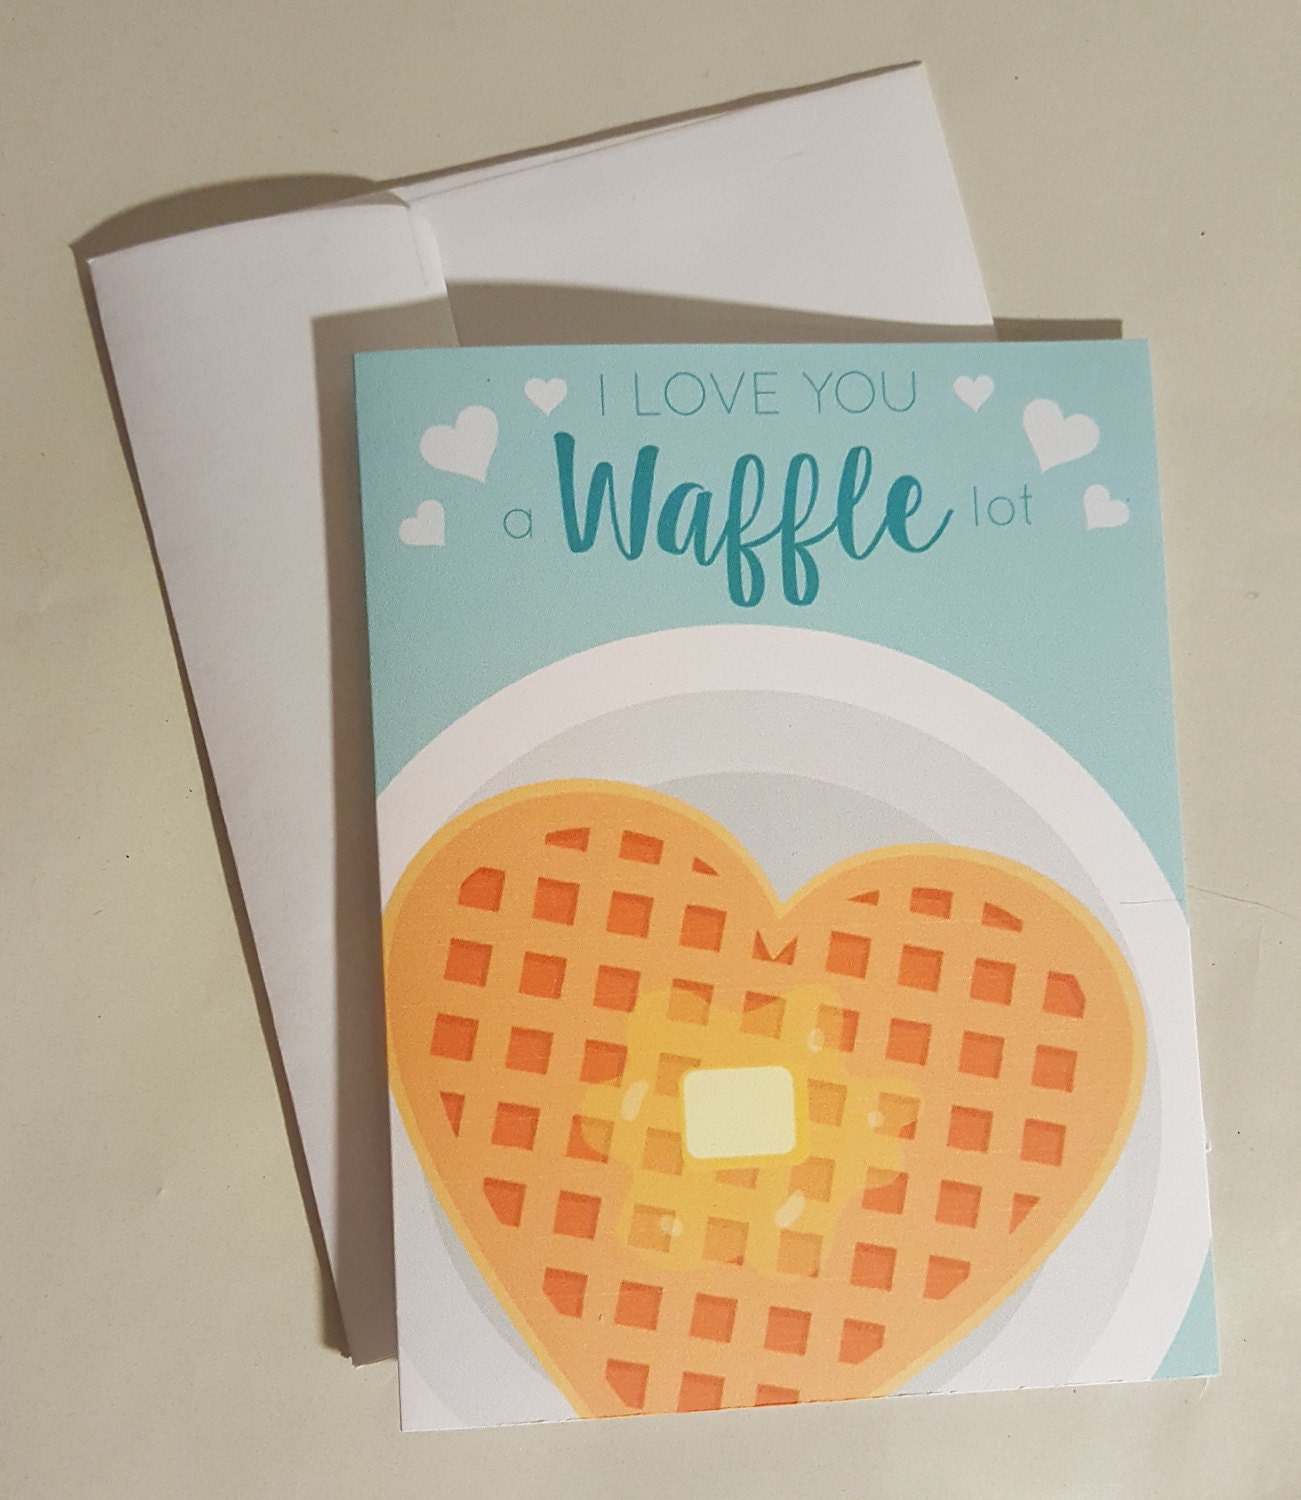 Valentine's Day Card - I Love You a Waffle Lot